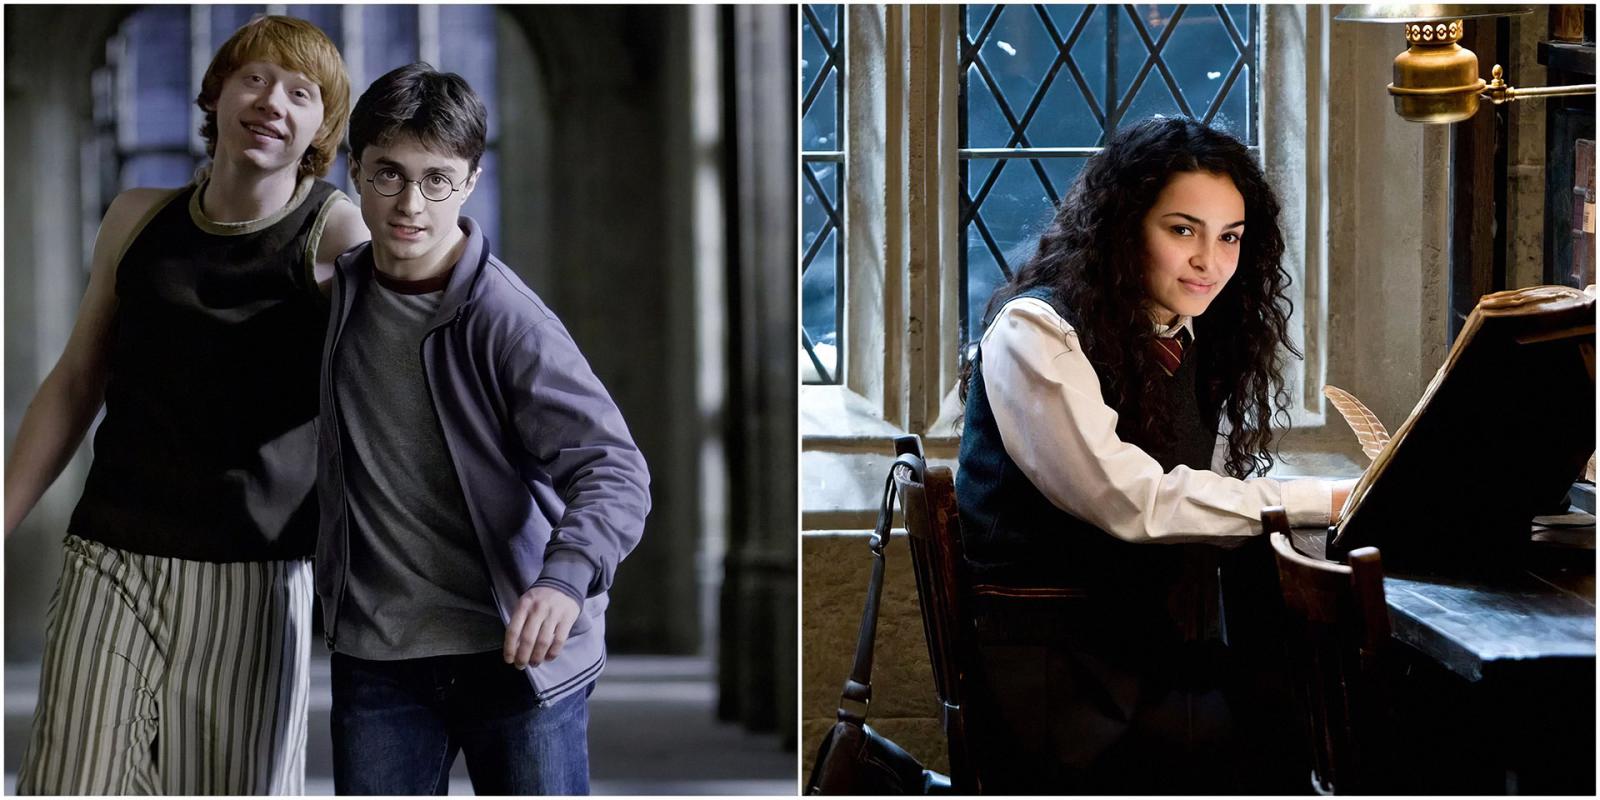 Then and Now: Harry Potter Star Looks Unrecognizable in 2023 - image 1